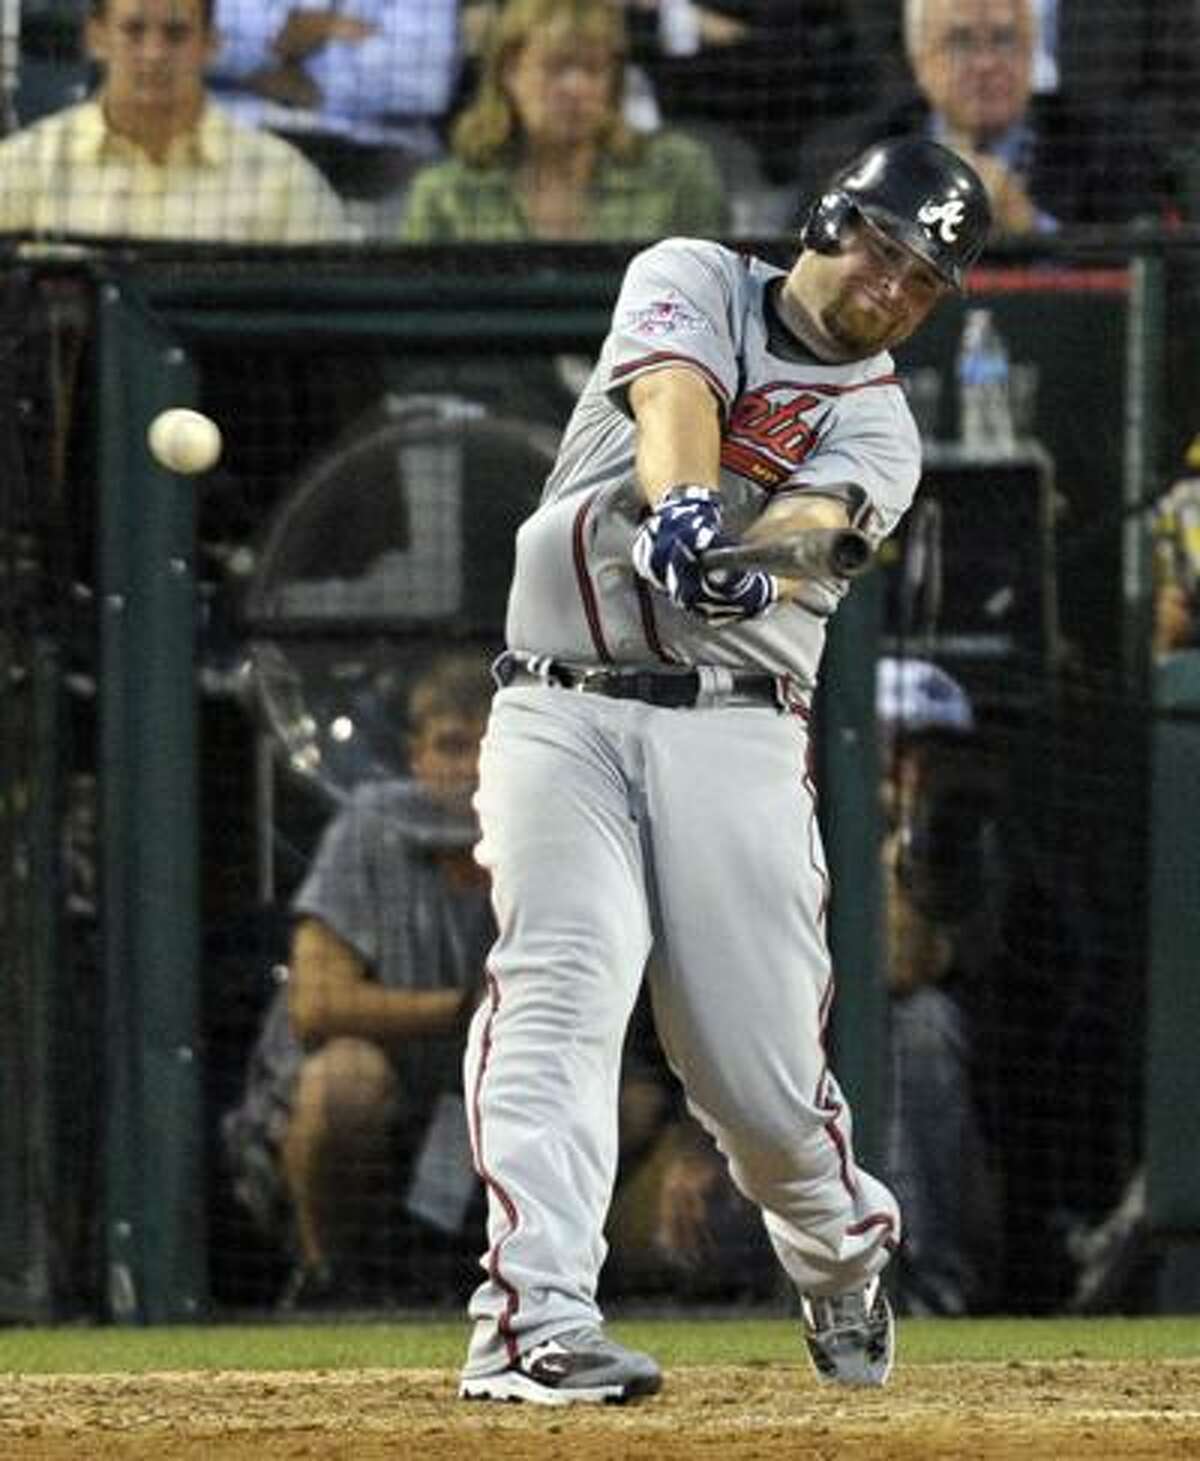 he National League's Brian McCann, of the Atlanta Braves, hits a three-run double in the seventh inning of the All-Star baseball game Tuesday, July 13, 2010, in Anaheim, Calif. (AP)